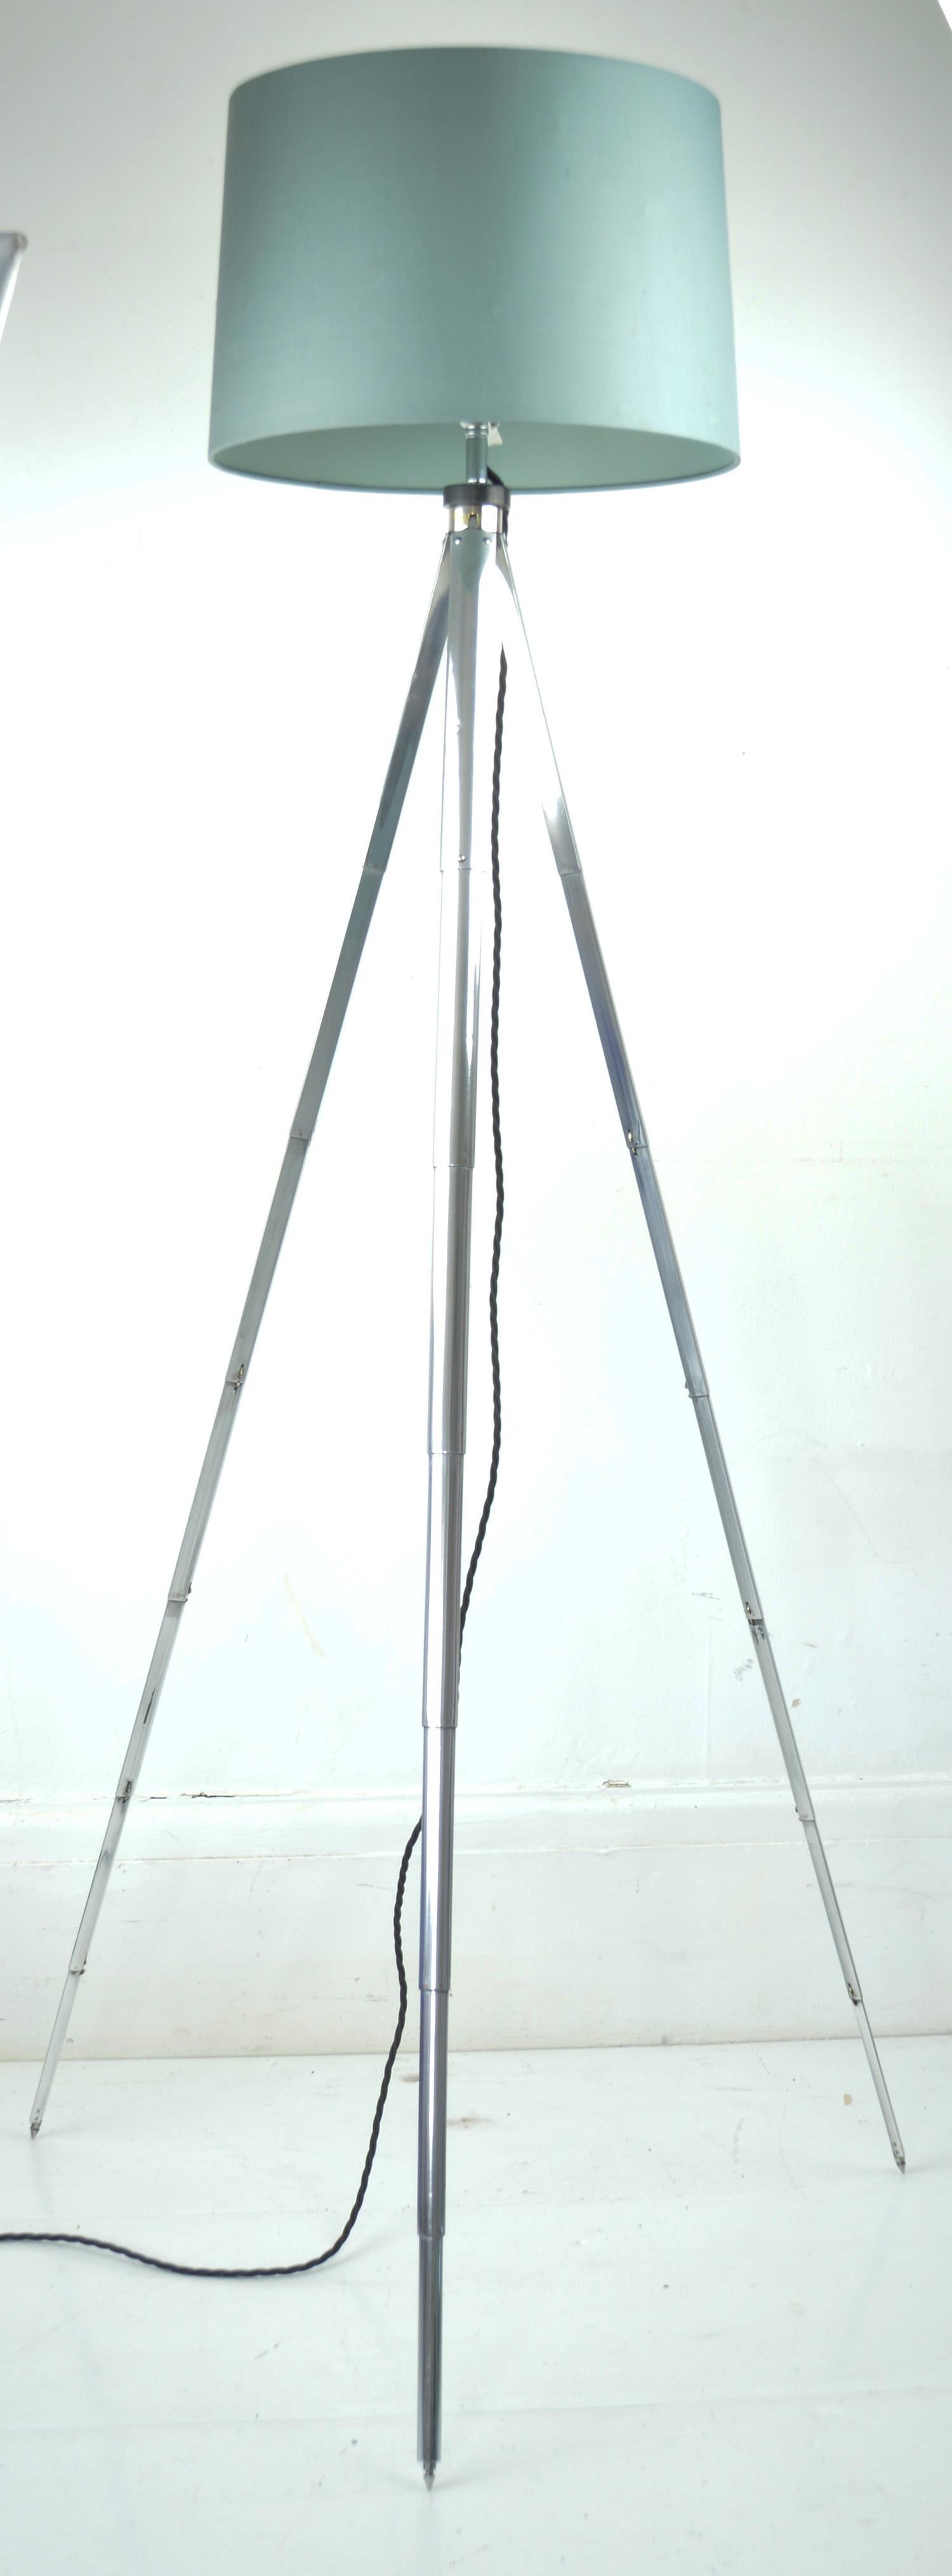 Originally a camera tripod. The tubular aluminium is telescopic.

The piece has been converted to a light fitting.

The legs are adjustable so you can change the height.

The height measurement I give below relates to the position in the